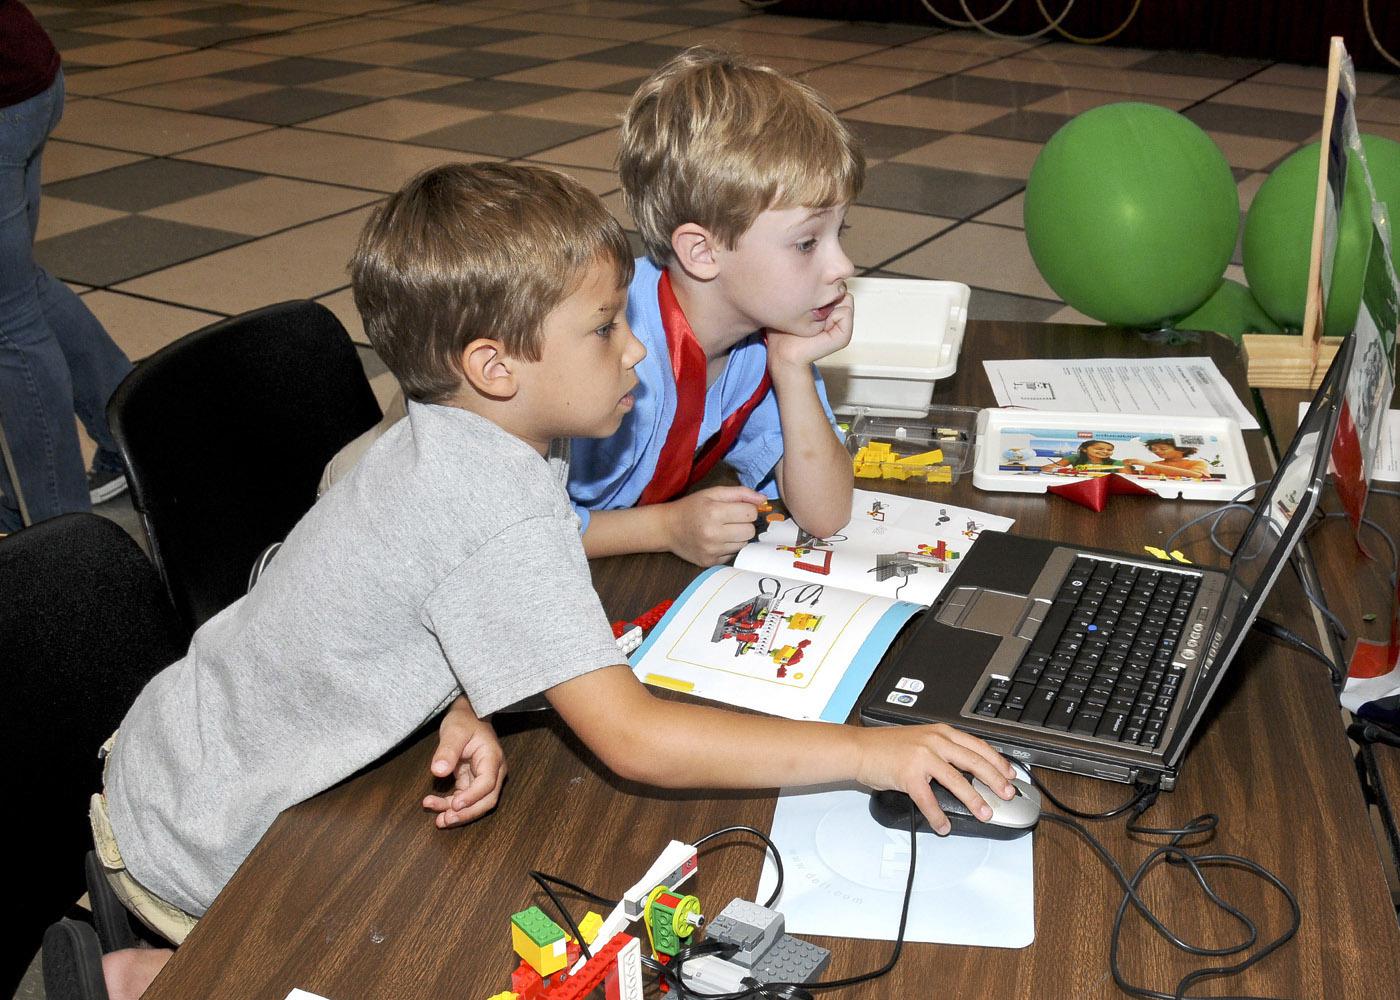 Ethan Hicks and Eric Mellin of Starkville follow instructions to program the soccer goalie robot they built at the Cloverbud Camp held at Mississippi State University. (Photo by MSU Ag Communications/Scott Corey)